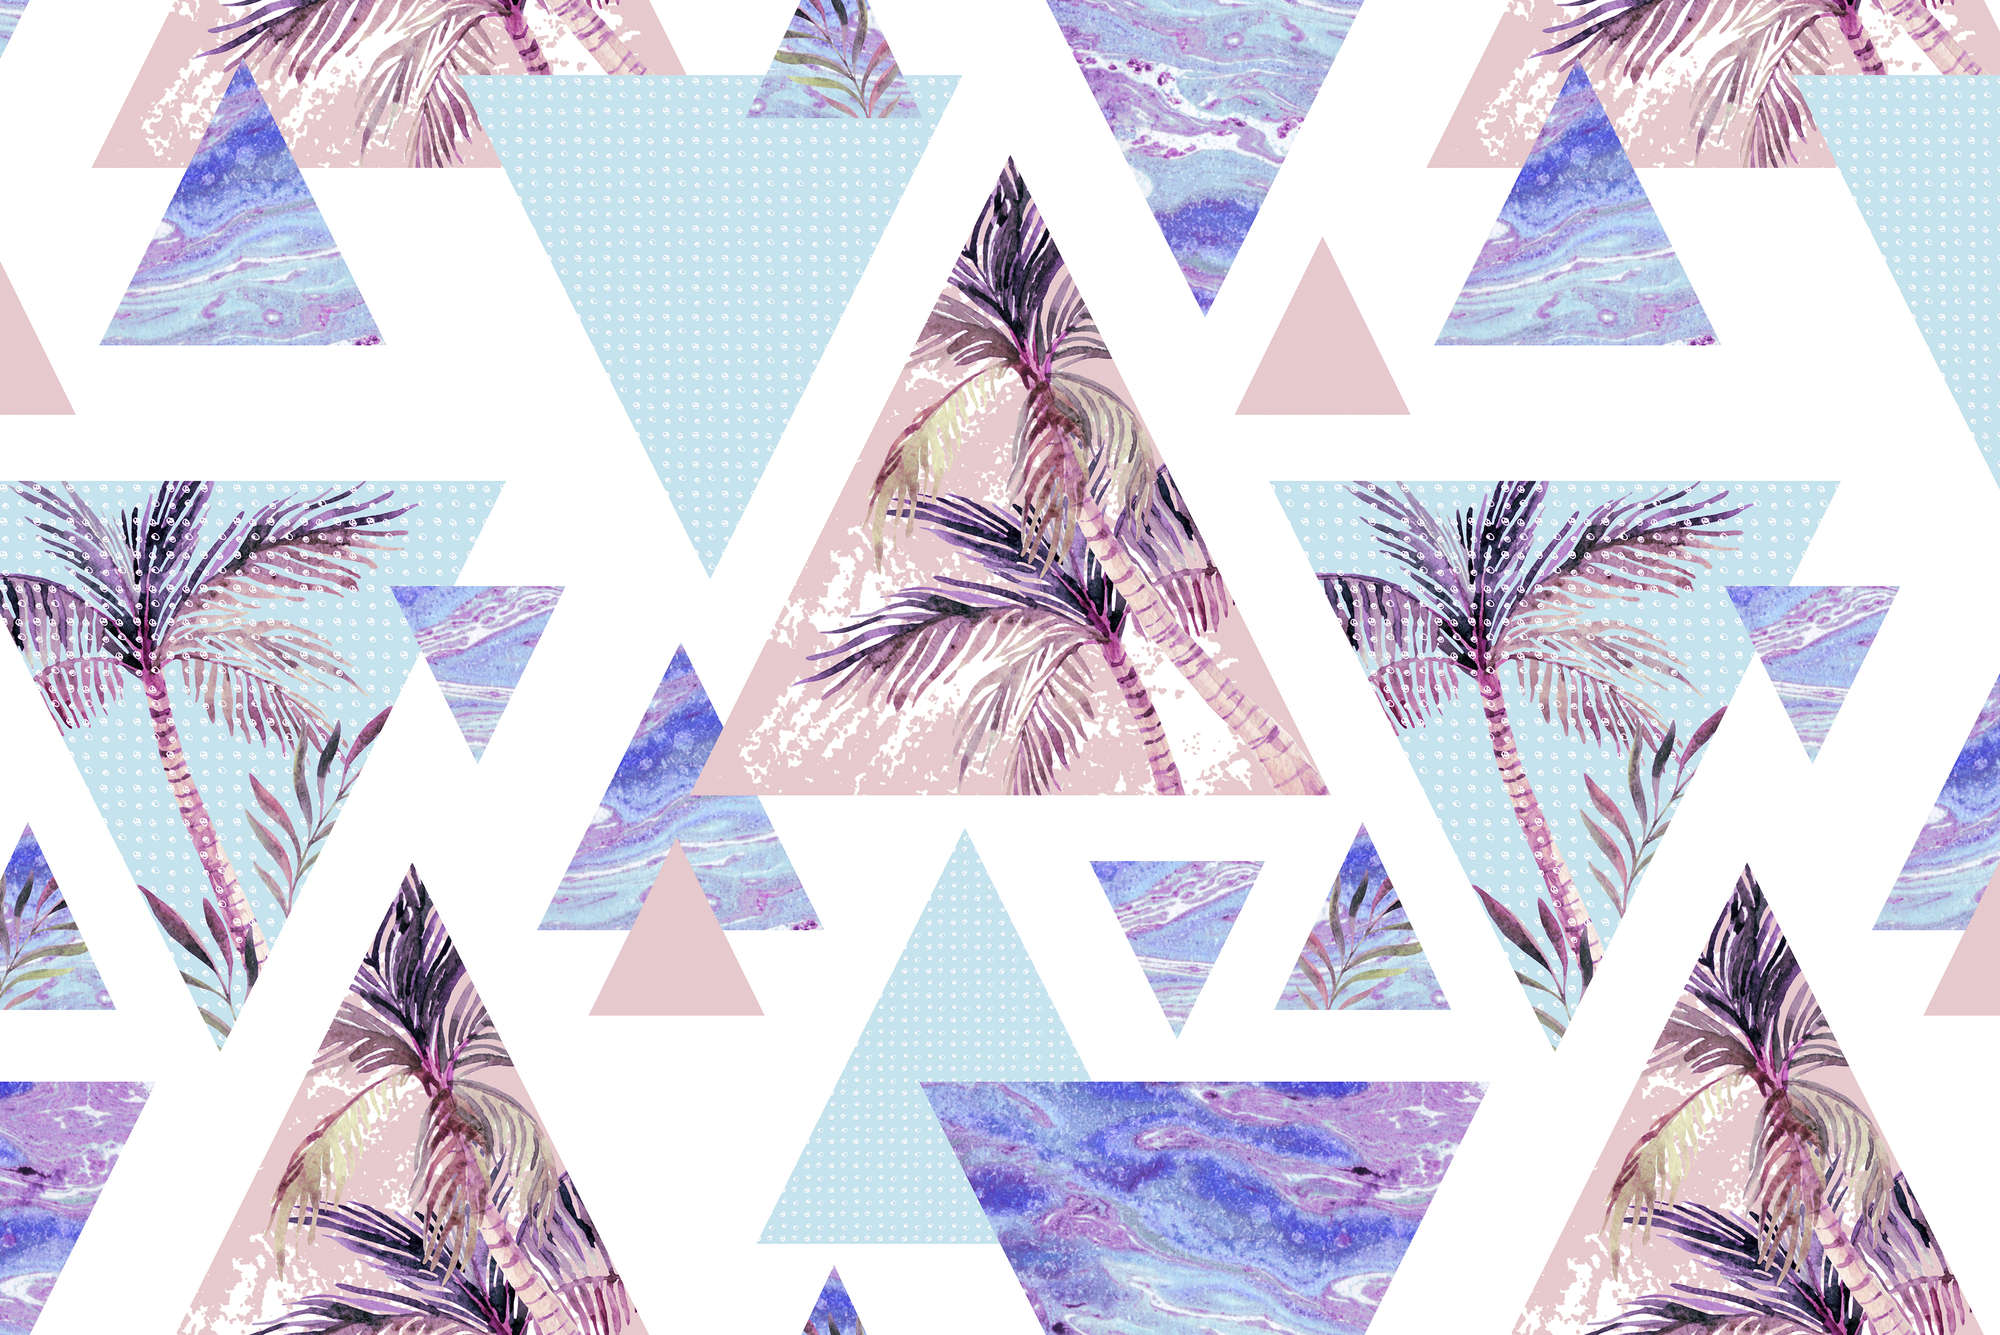             Graphic mural triangles with palm tree motifs on textured non-woven fabric
        